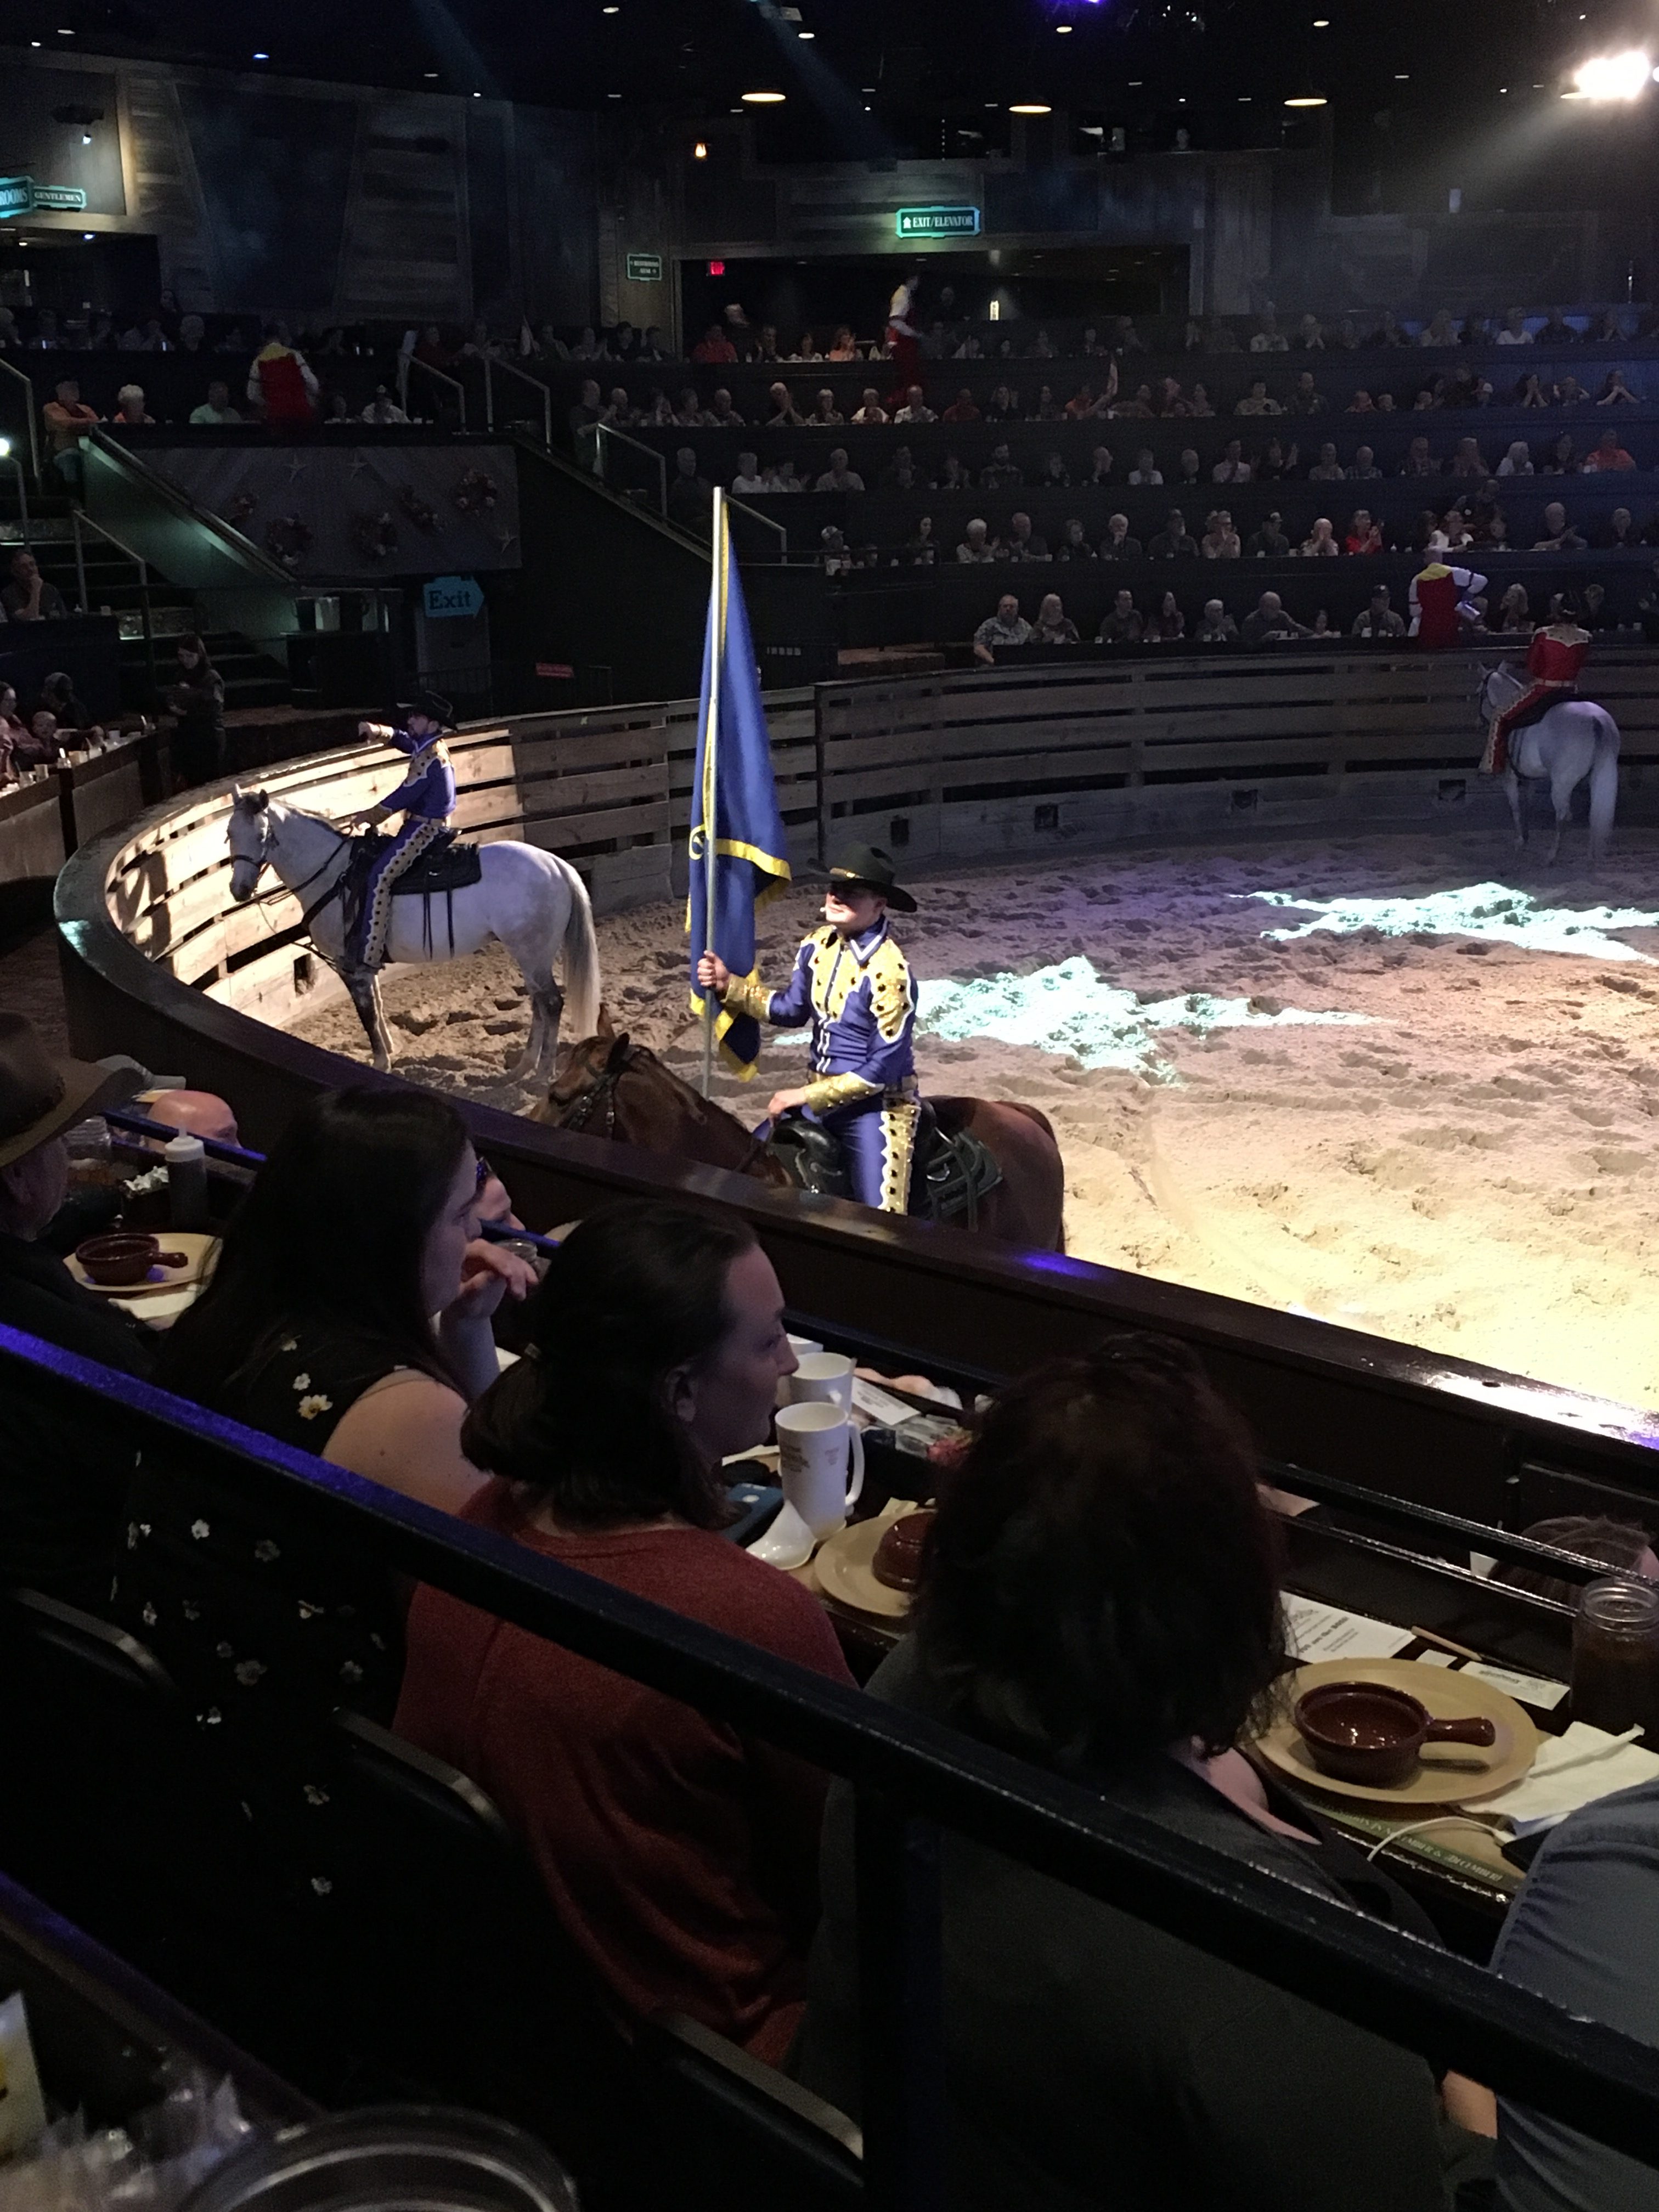 Dolly Parton’s Stampede - More Than Your Average Dinner Show